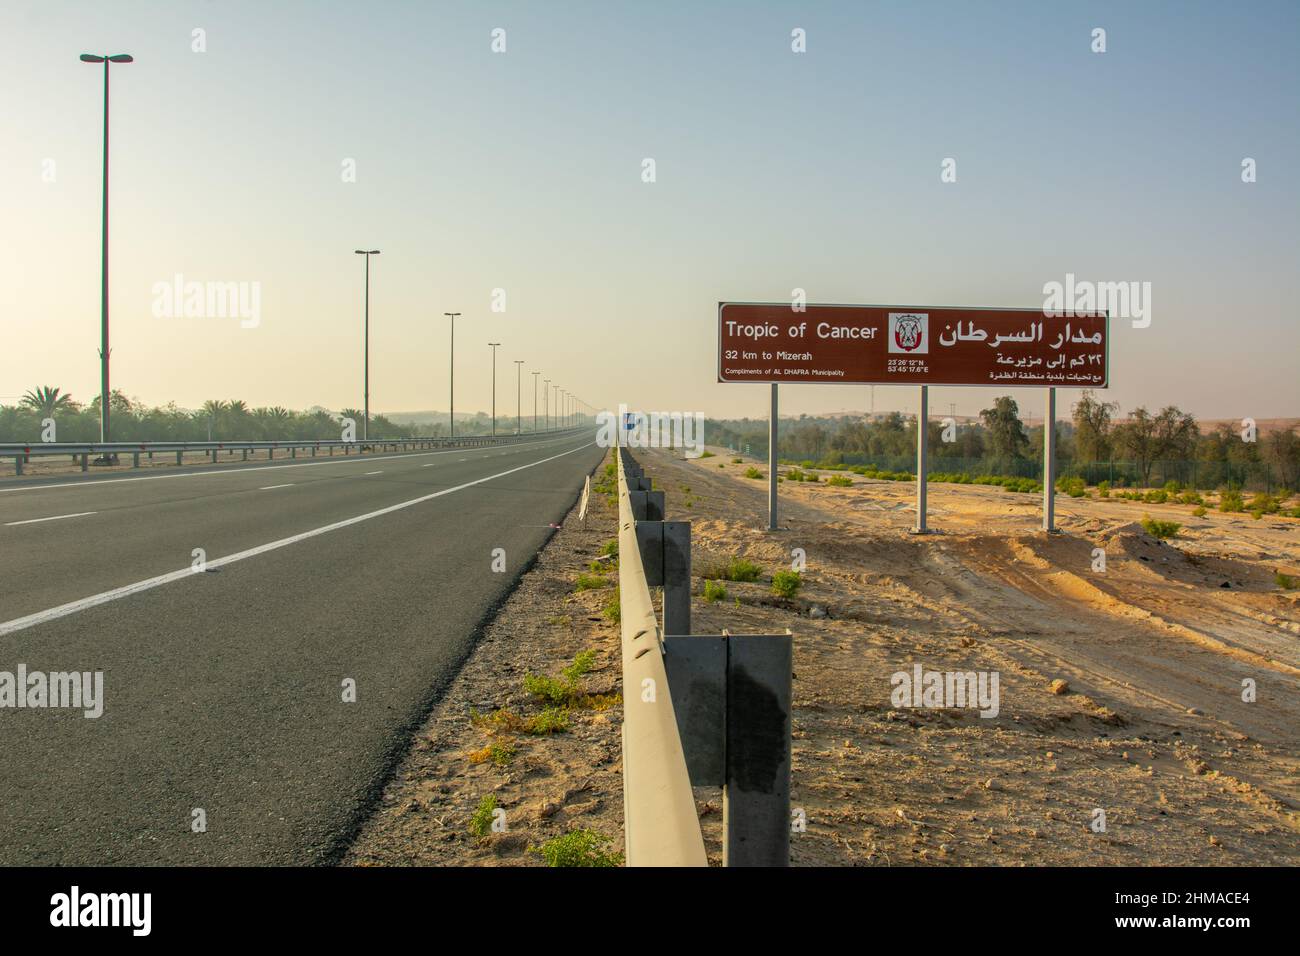 Road sign marking the Tropic of Cancer in the United Arab Emirates Stock Photo